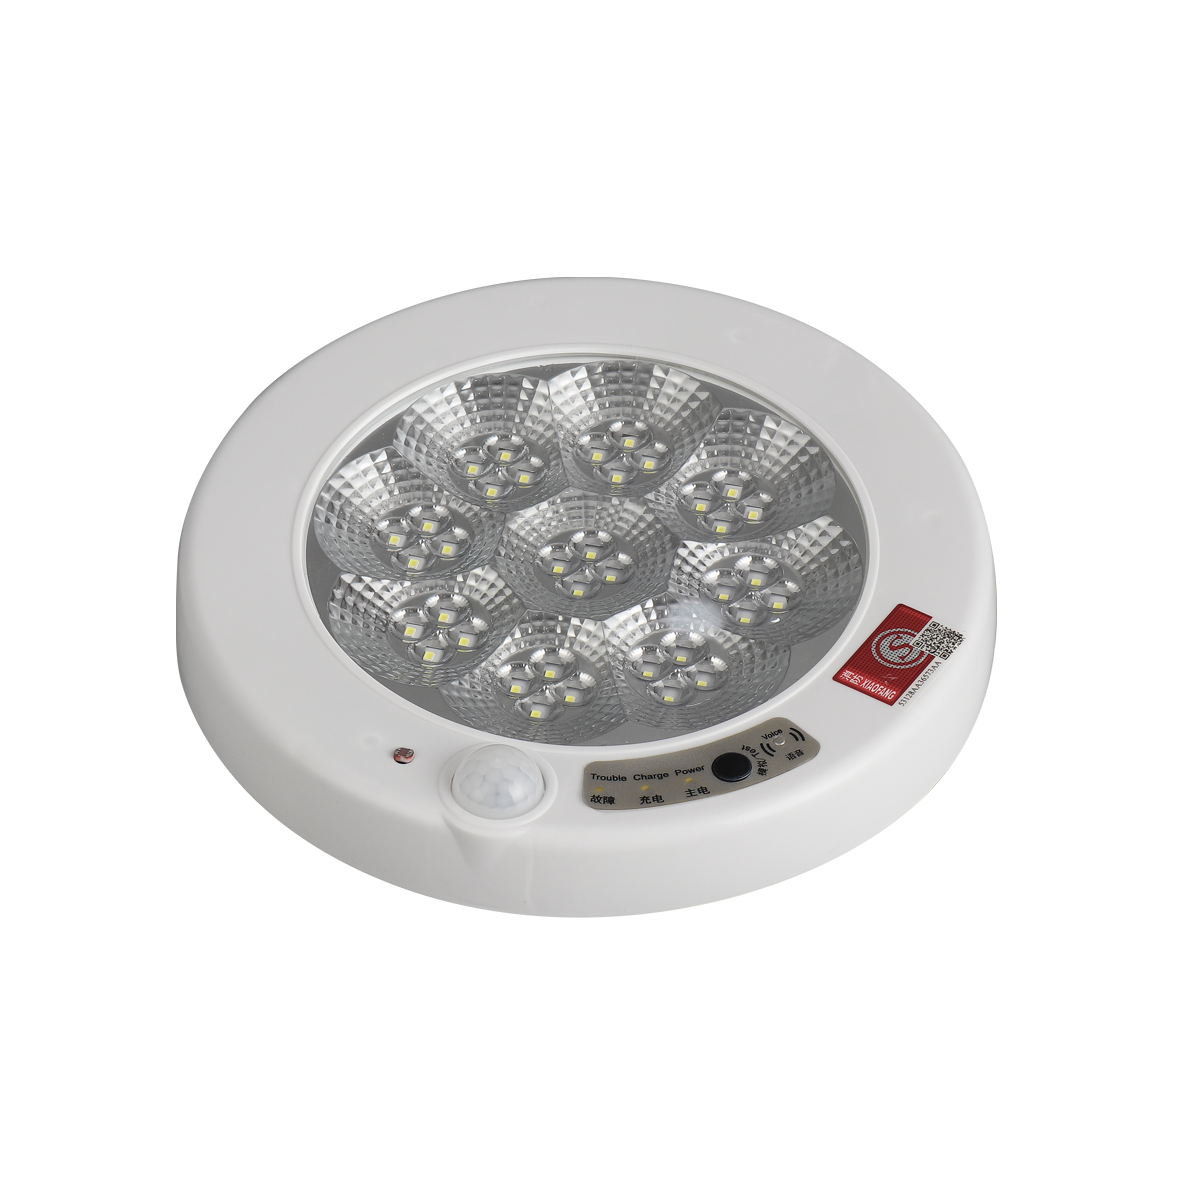 stairs, corridors, and plum blossoms LED induction voice controlled light controlled emergency light